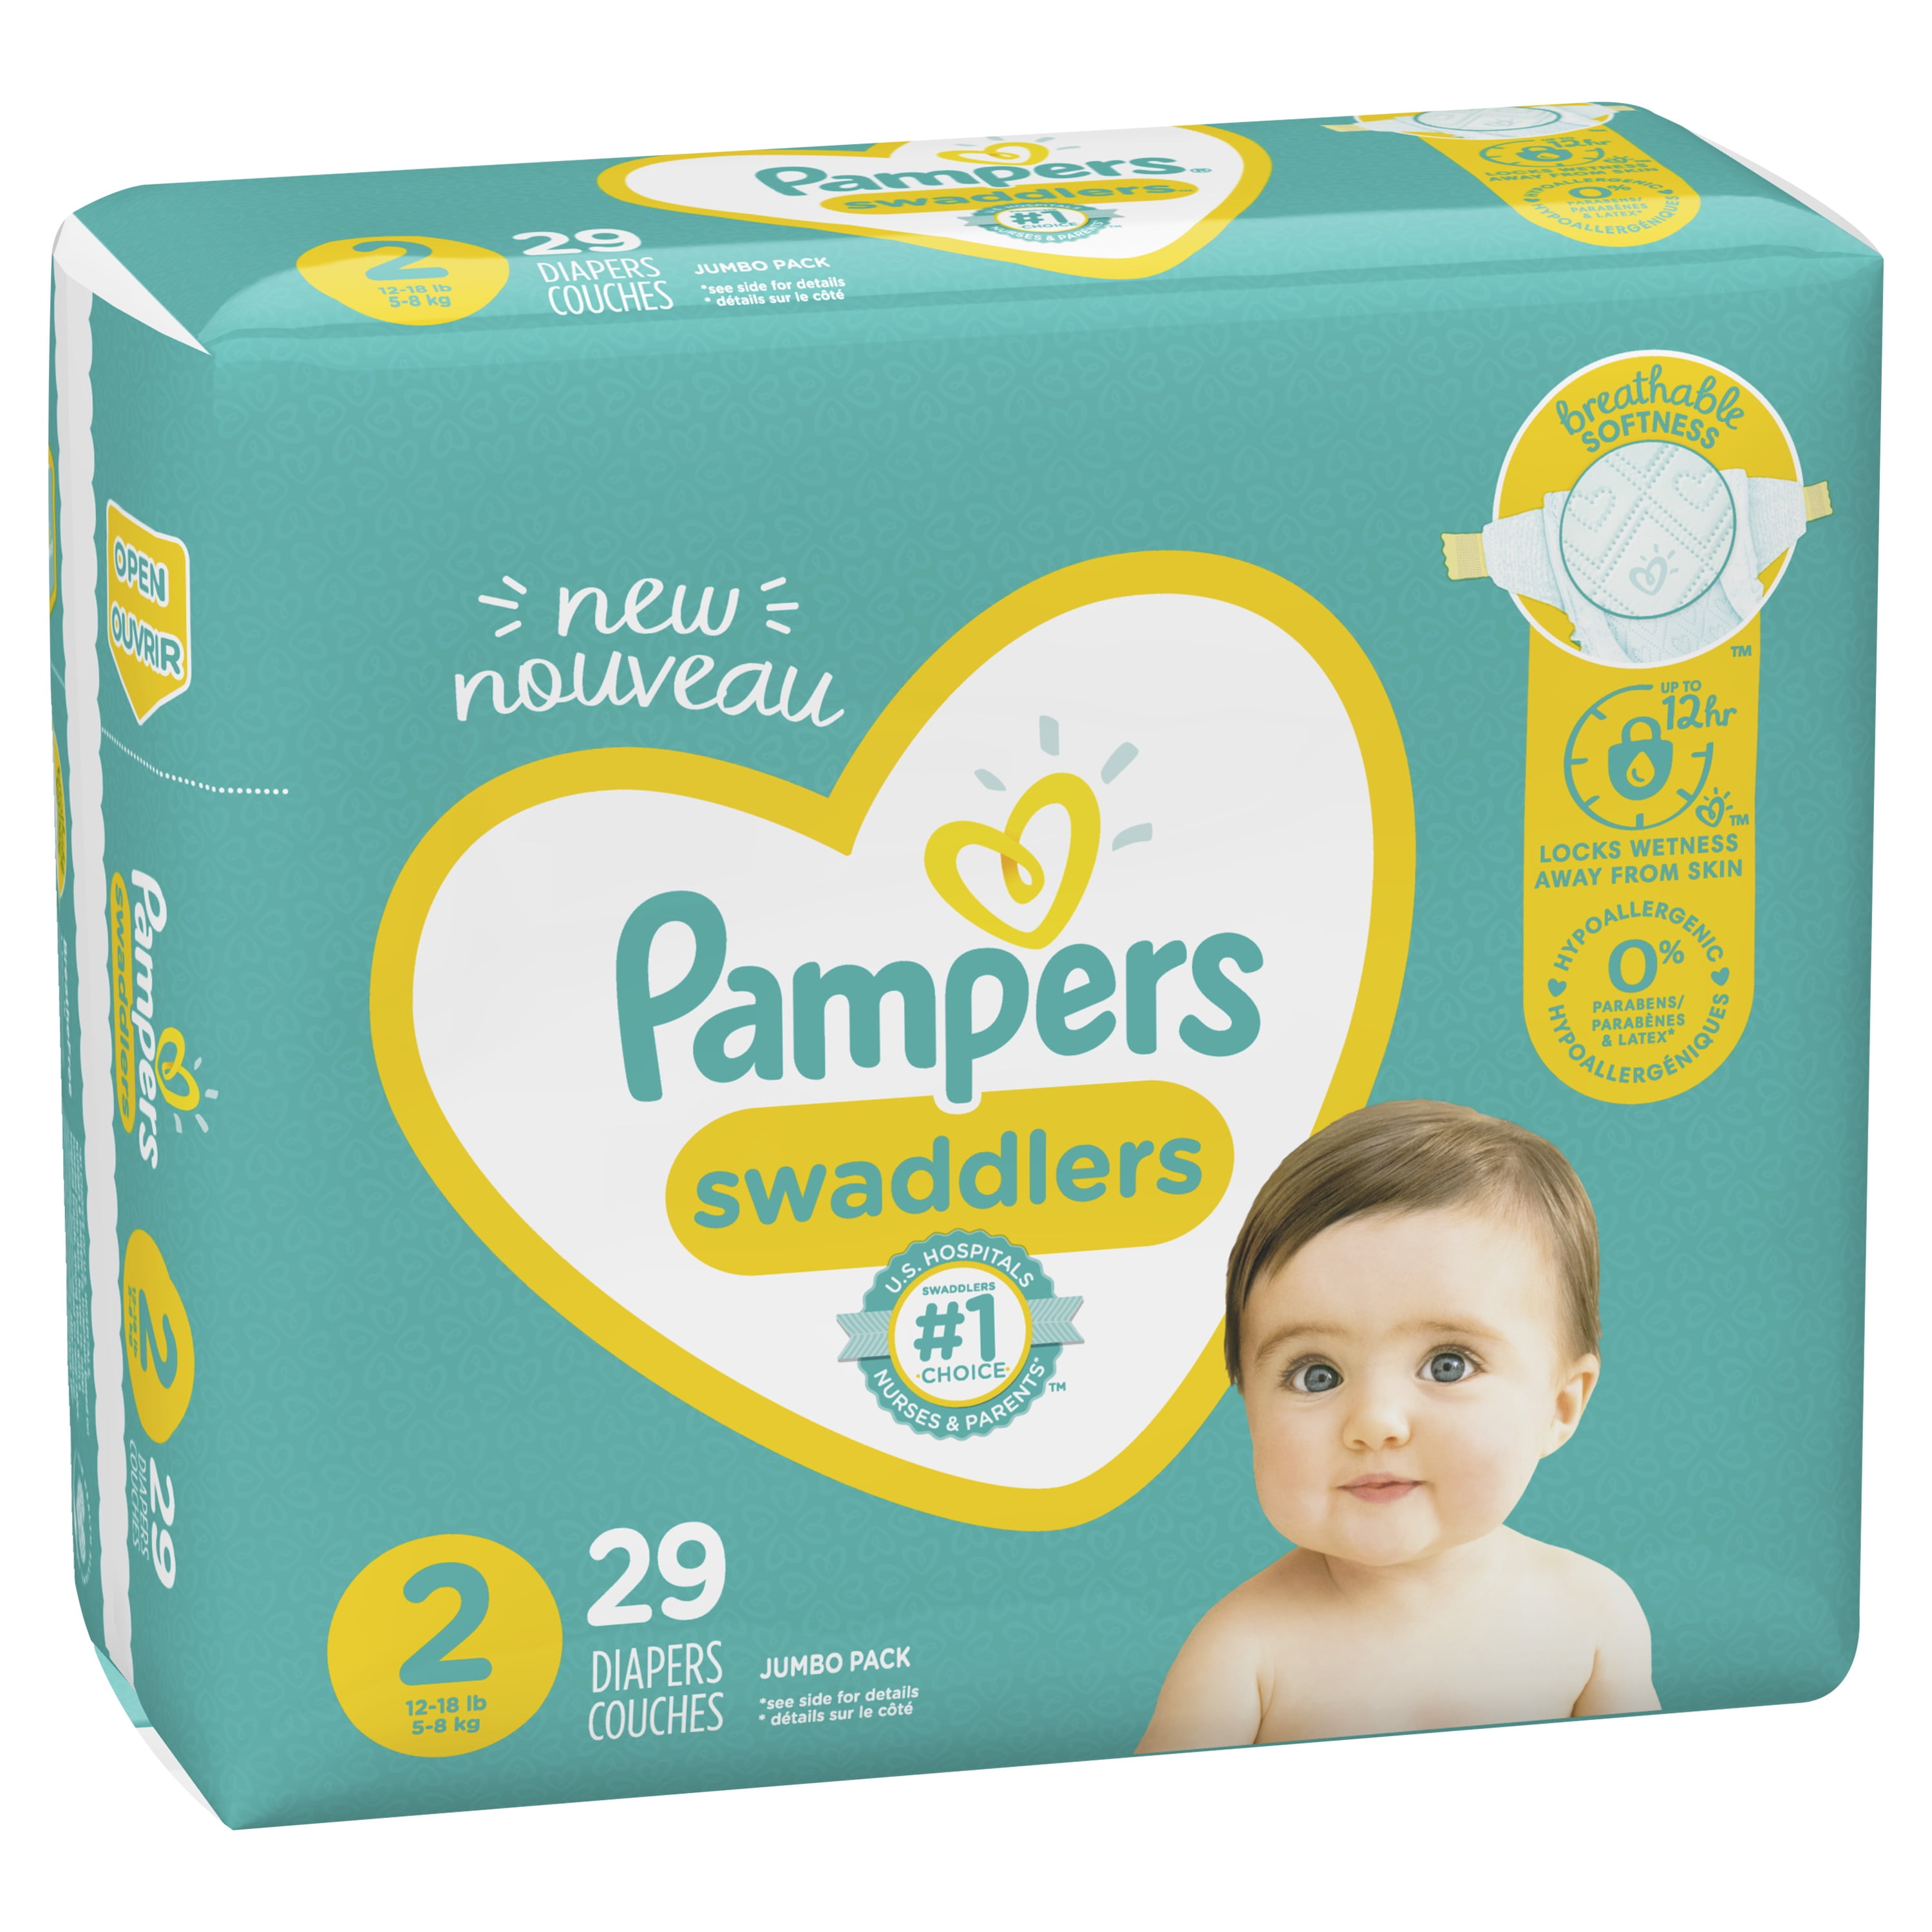 Pampers Swaddlers Hypoallergenic Soft Diapers - Size 2, 29 Count 